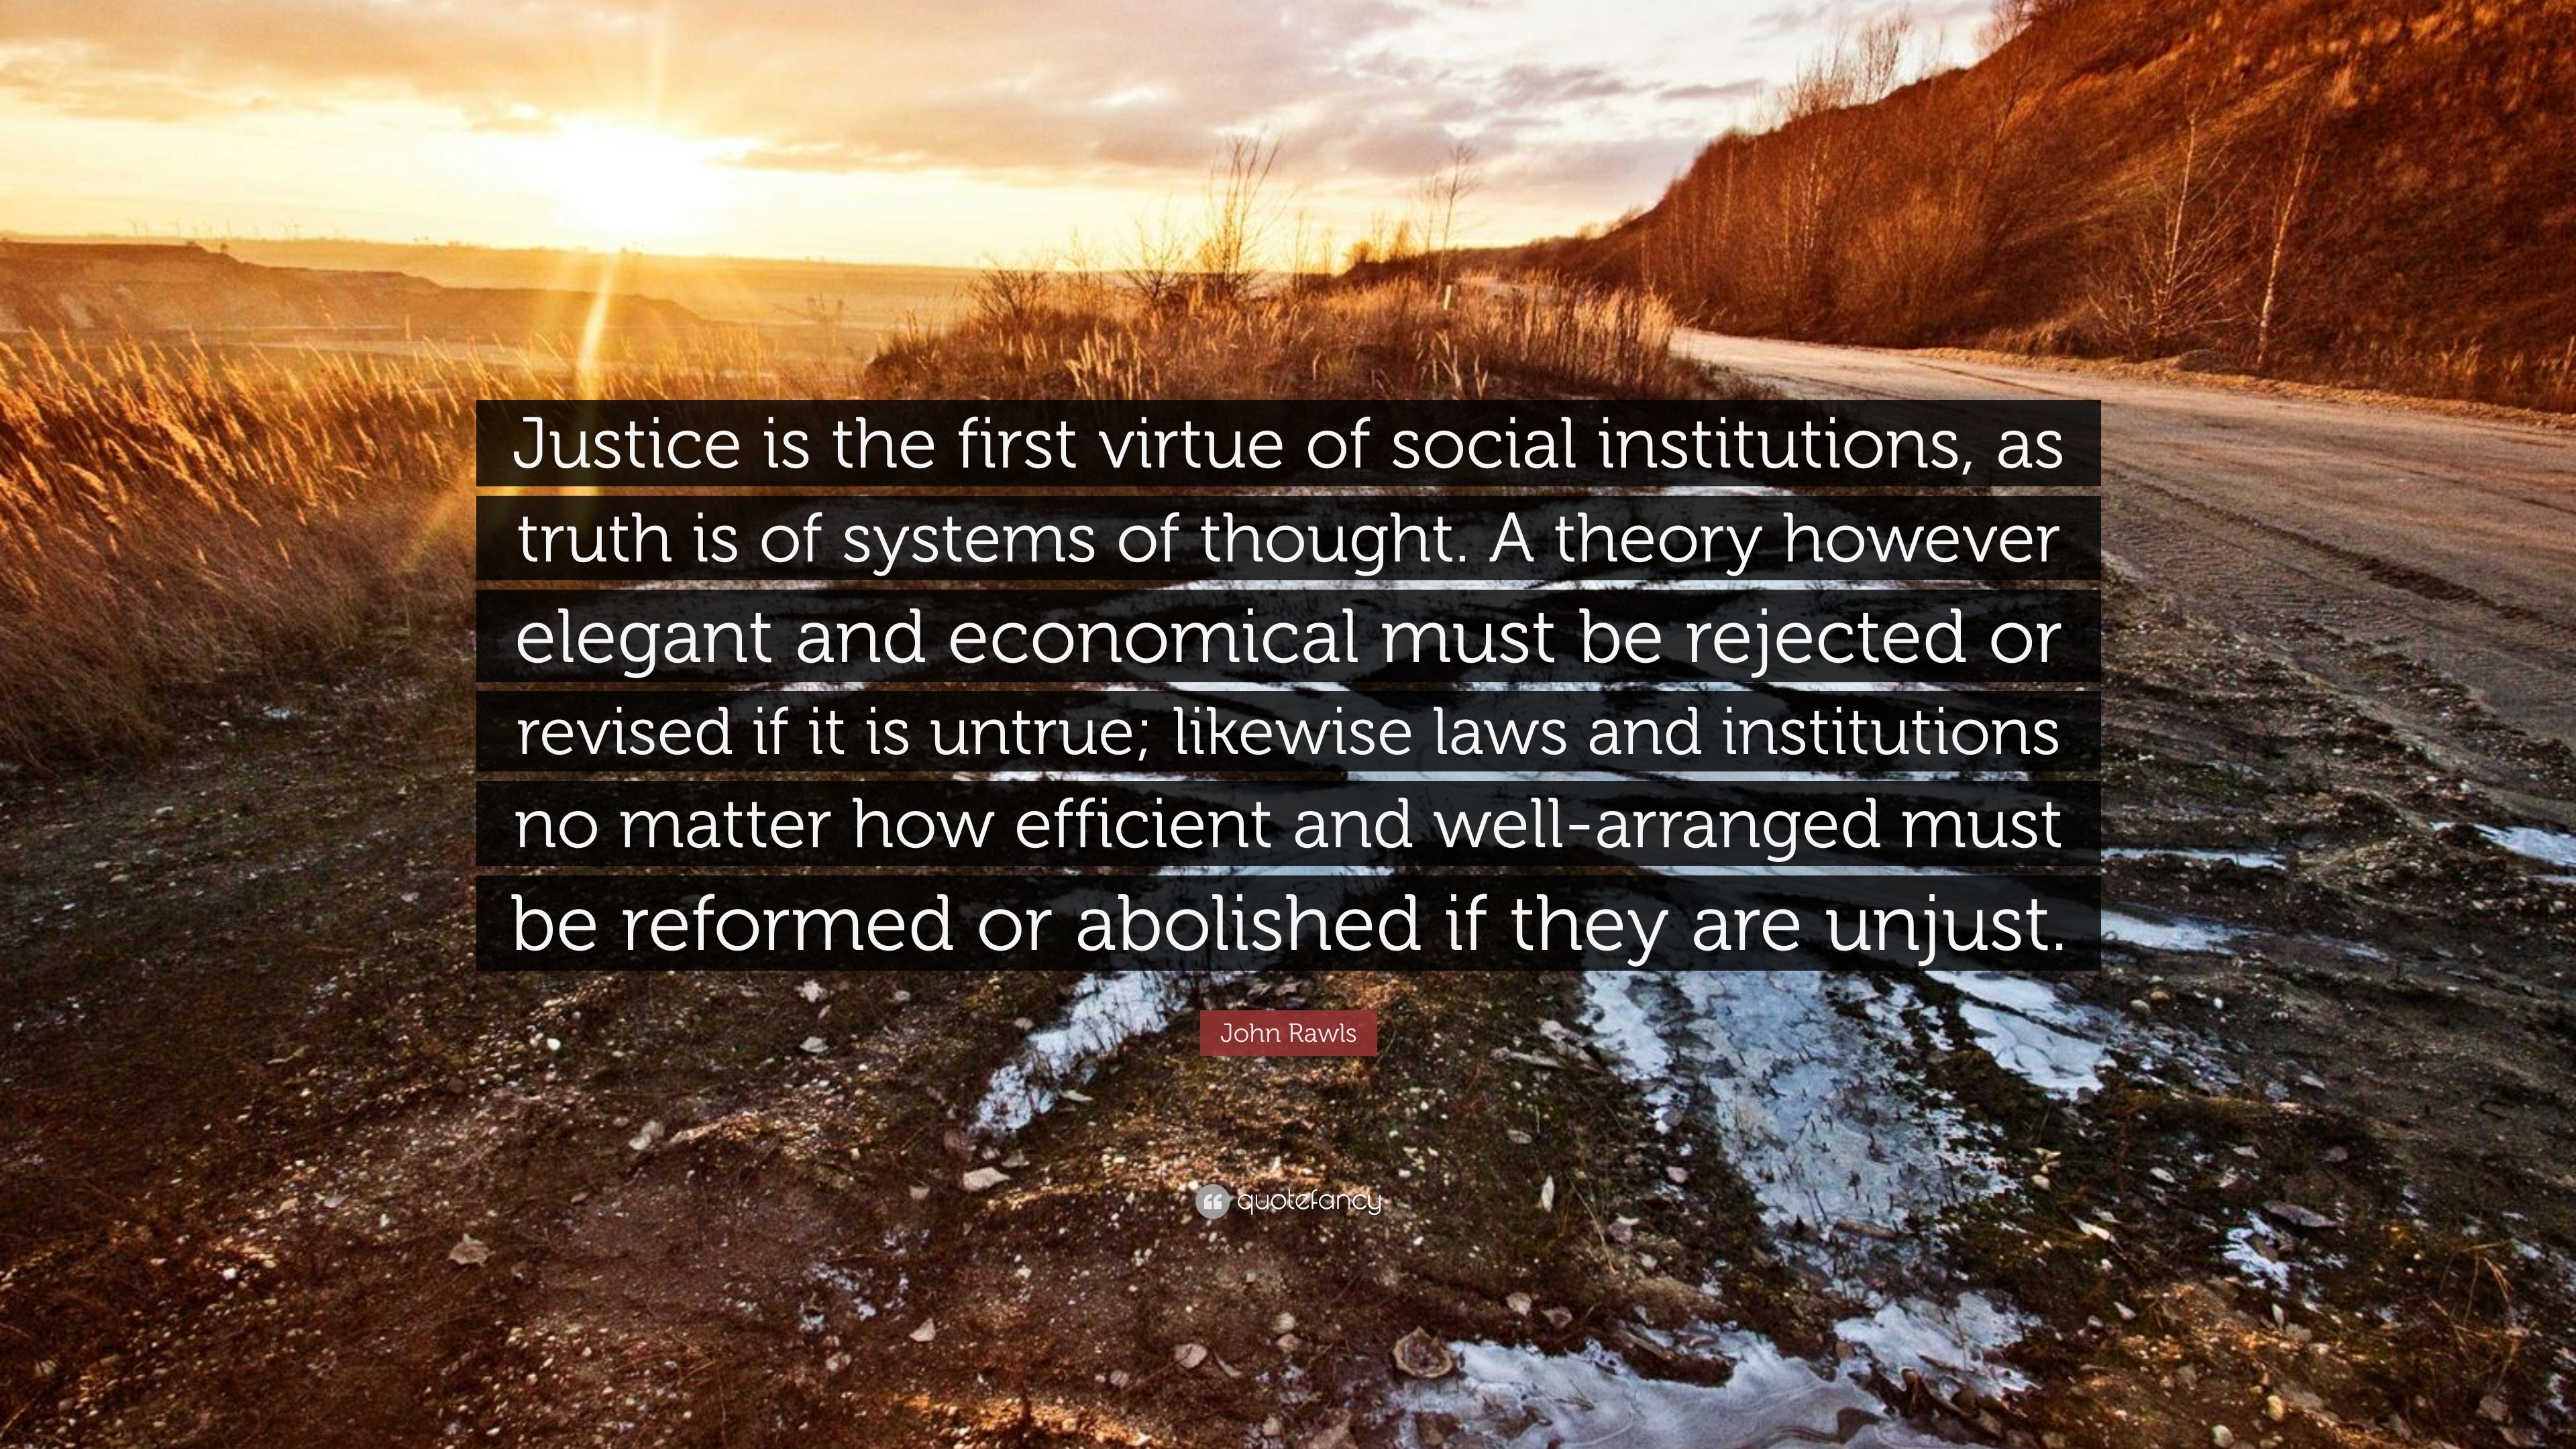 John Rawls Quote Justice Is The First Virtue Of Social Institutions As Truth Is Of Systems Of Thought A Theory However Elegant And Econ 10 Wallpapers Quotefancy